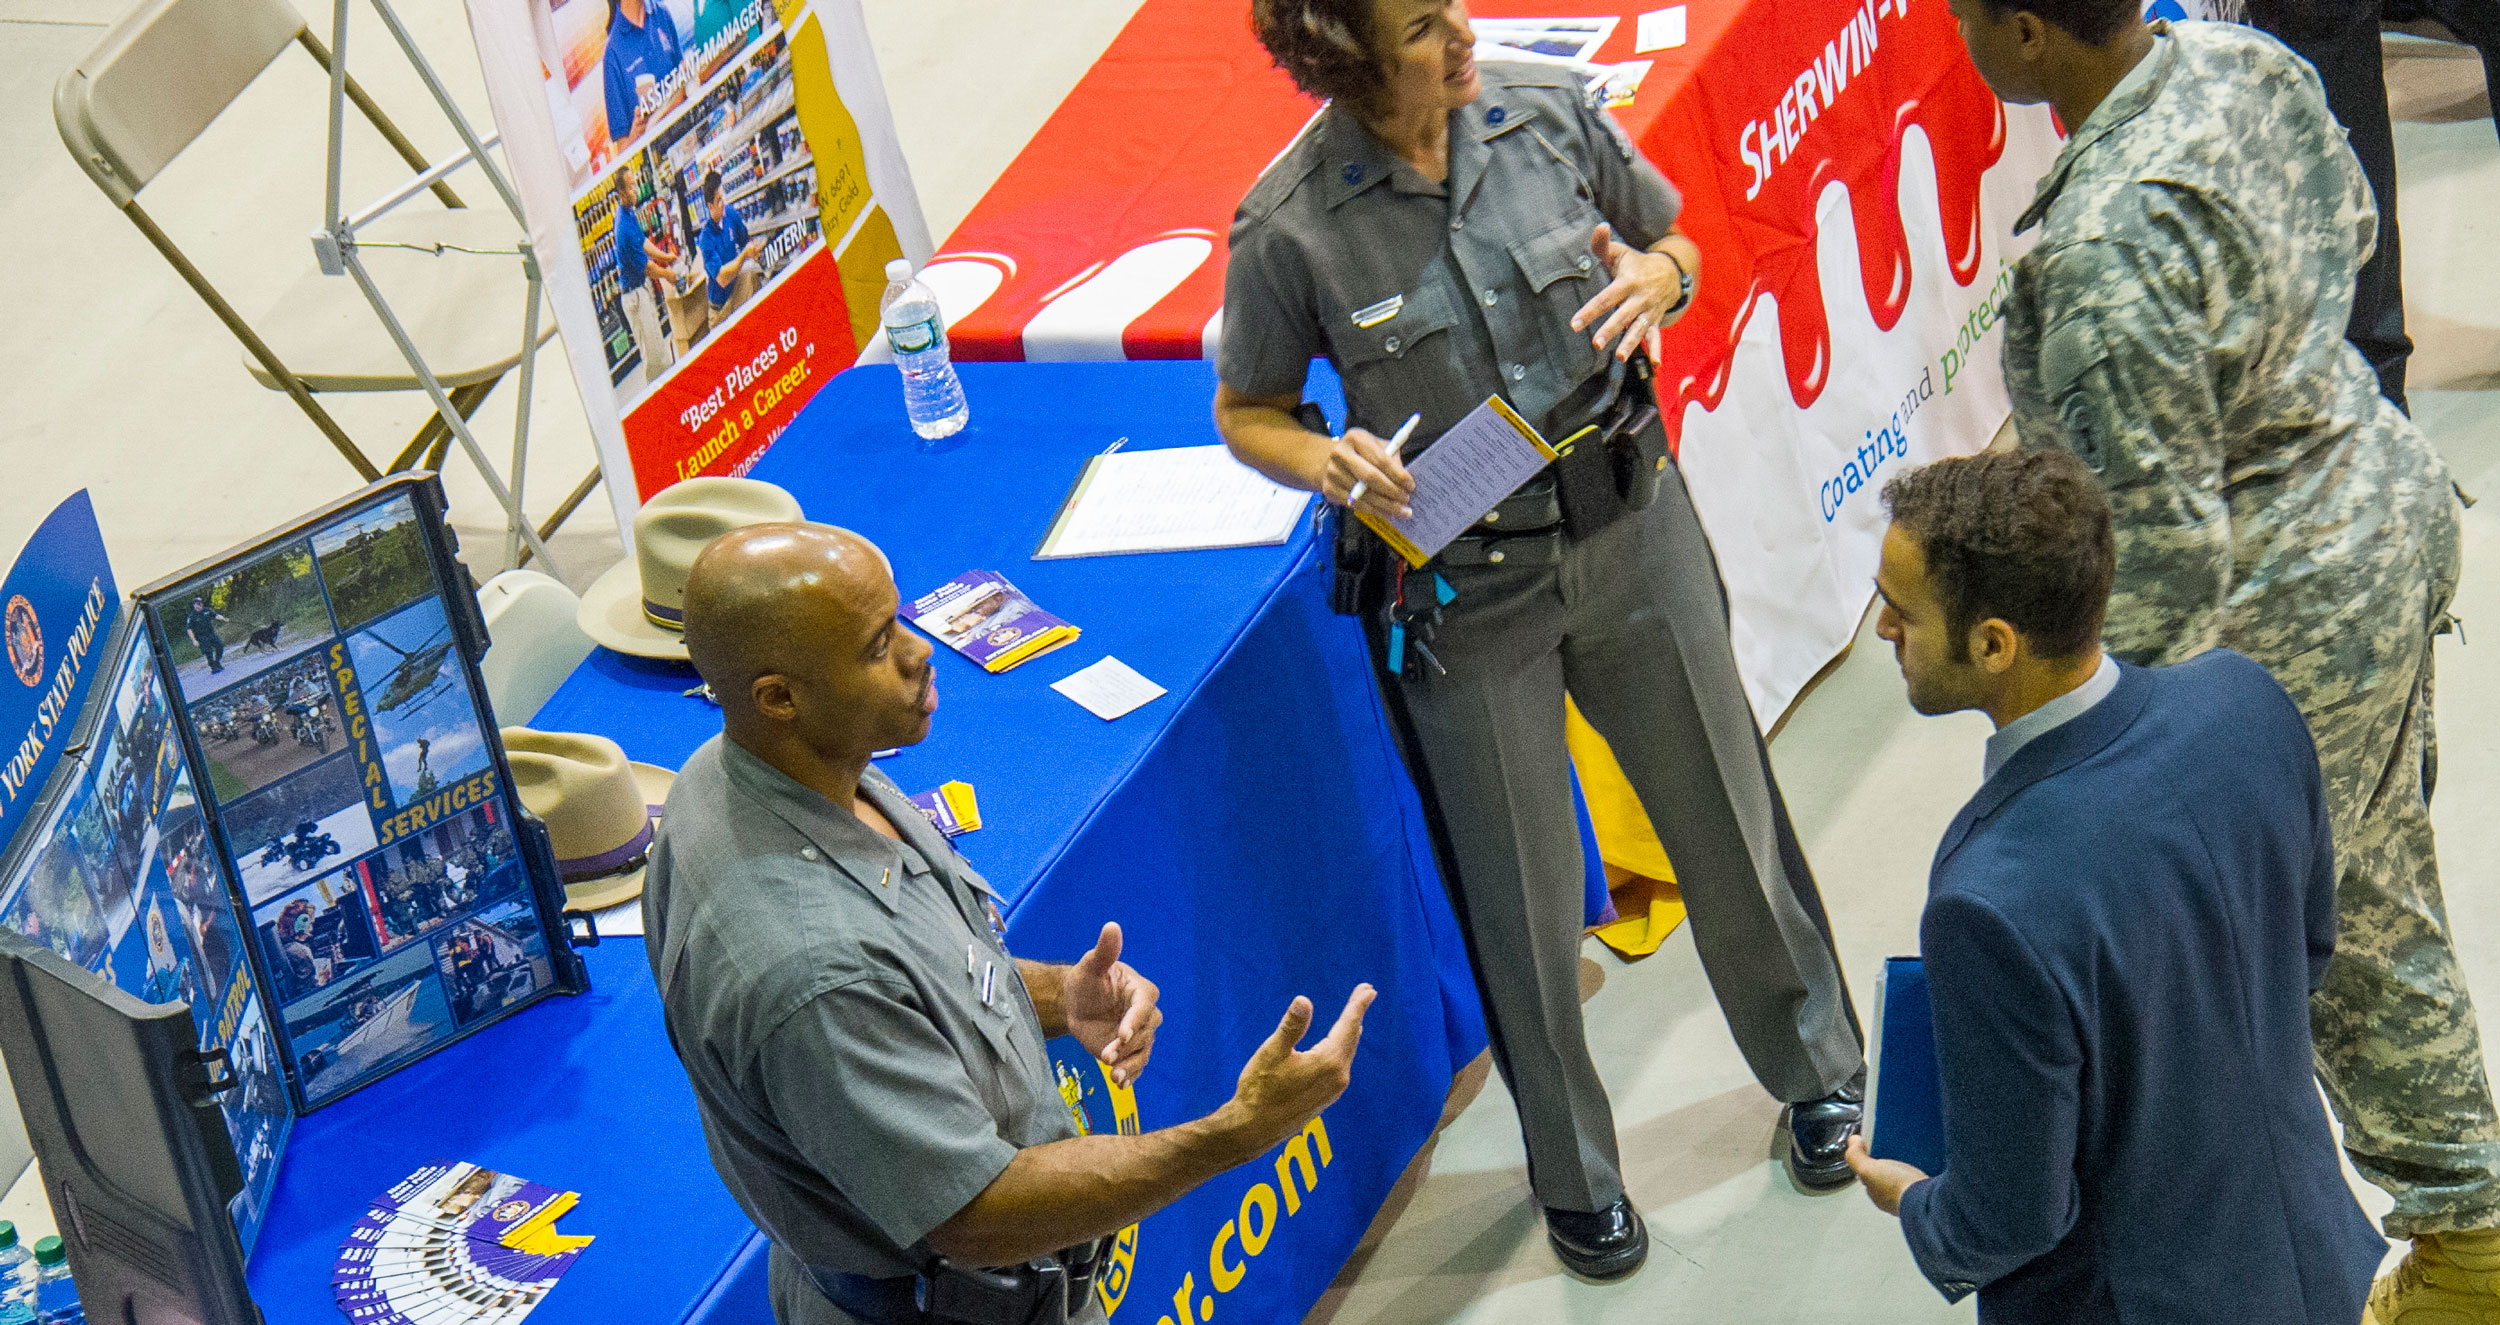 Members of the New York State Police speak with two students at a career fair.